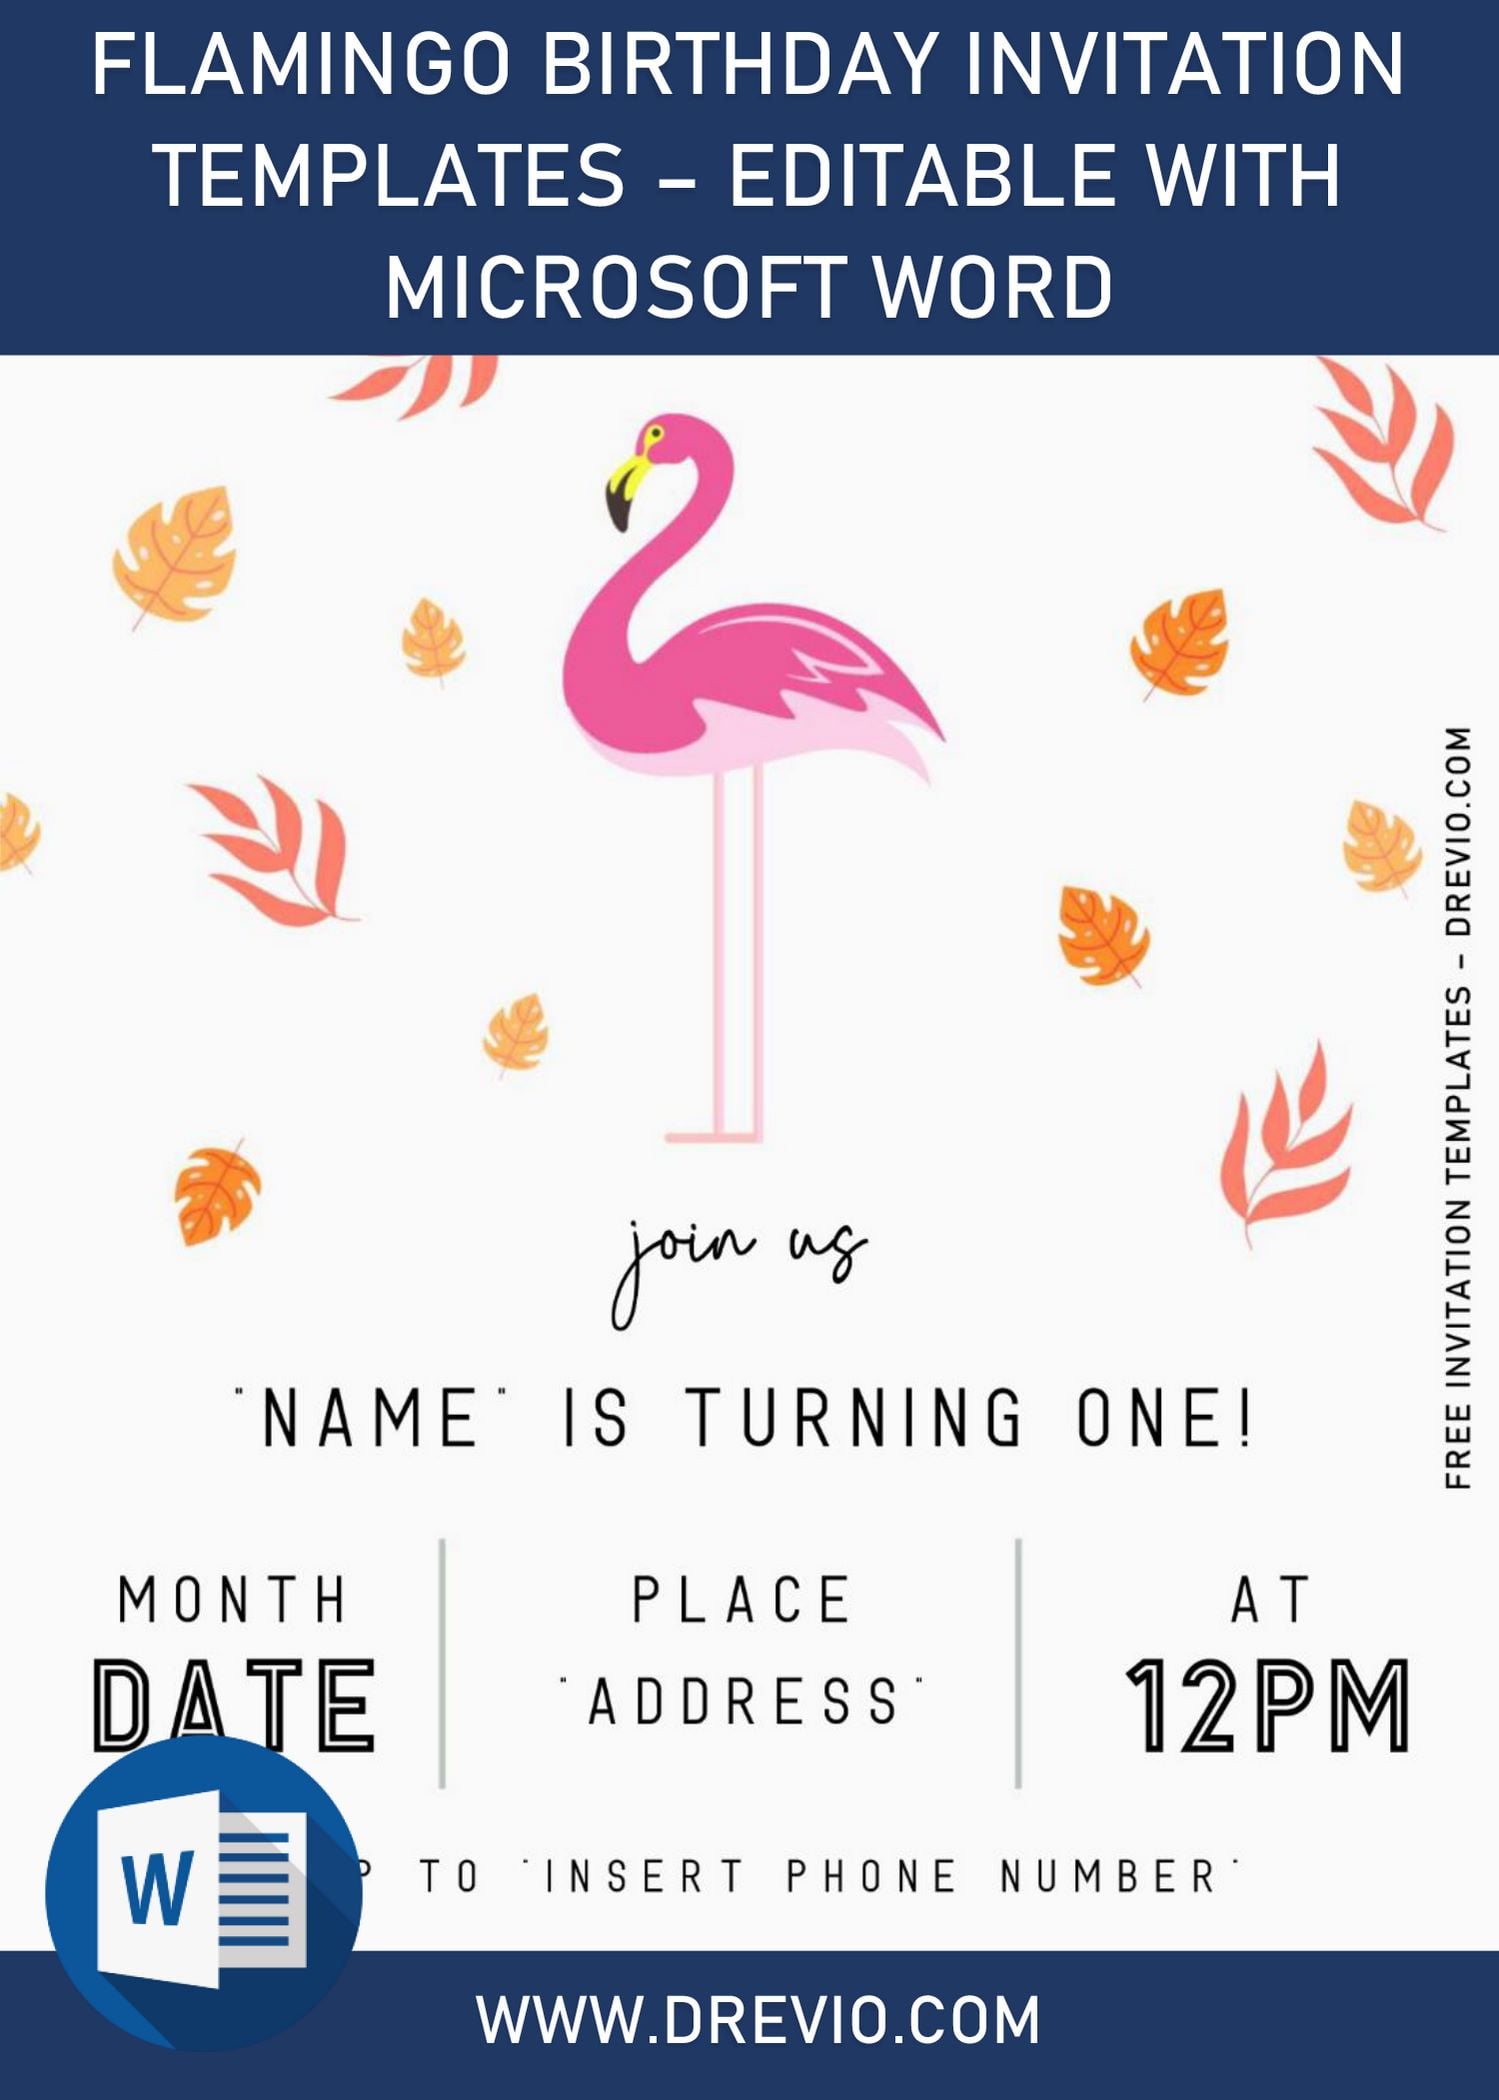 Flamingo Birthday Invitation Templates - Editable With Microsoft Word and has green leaves